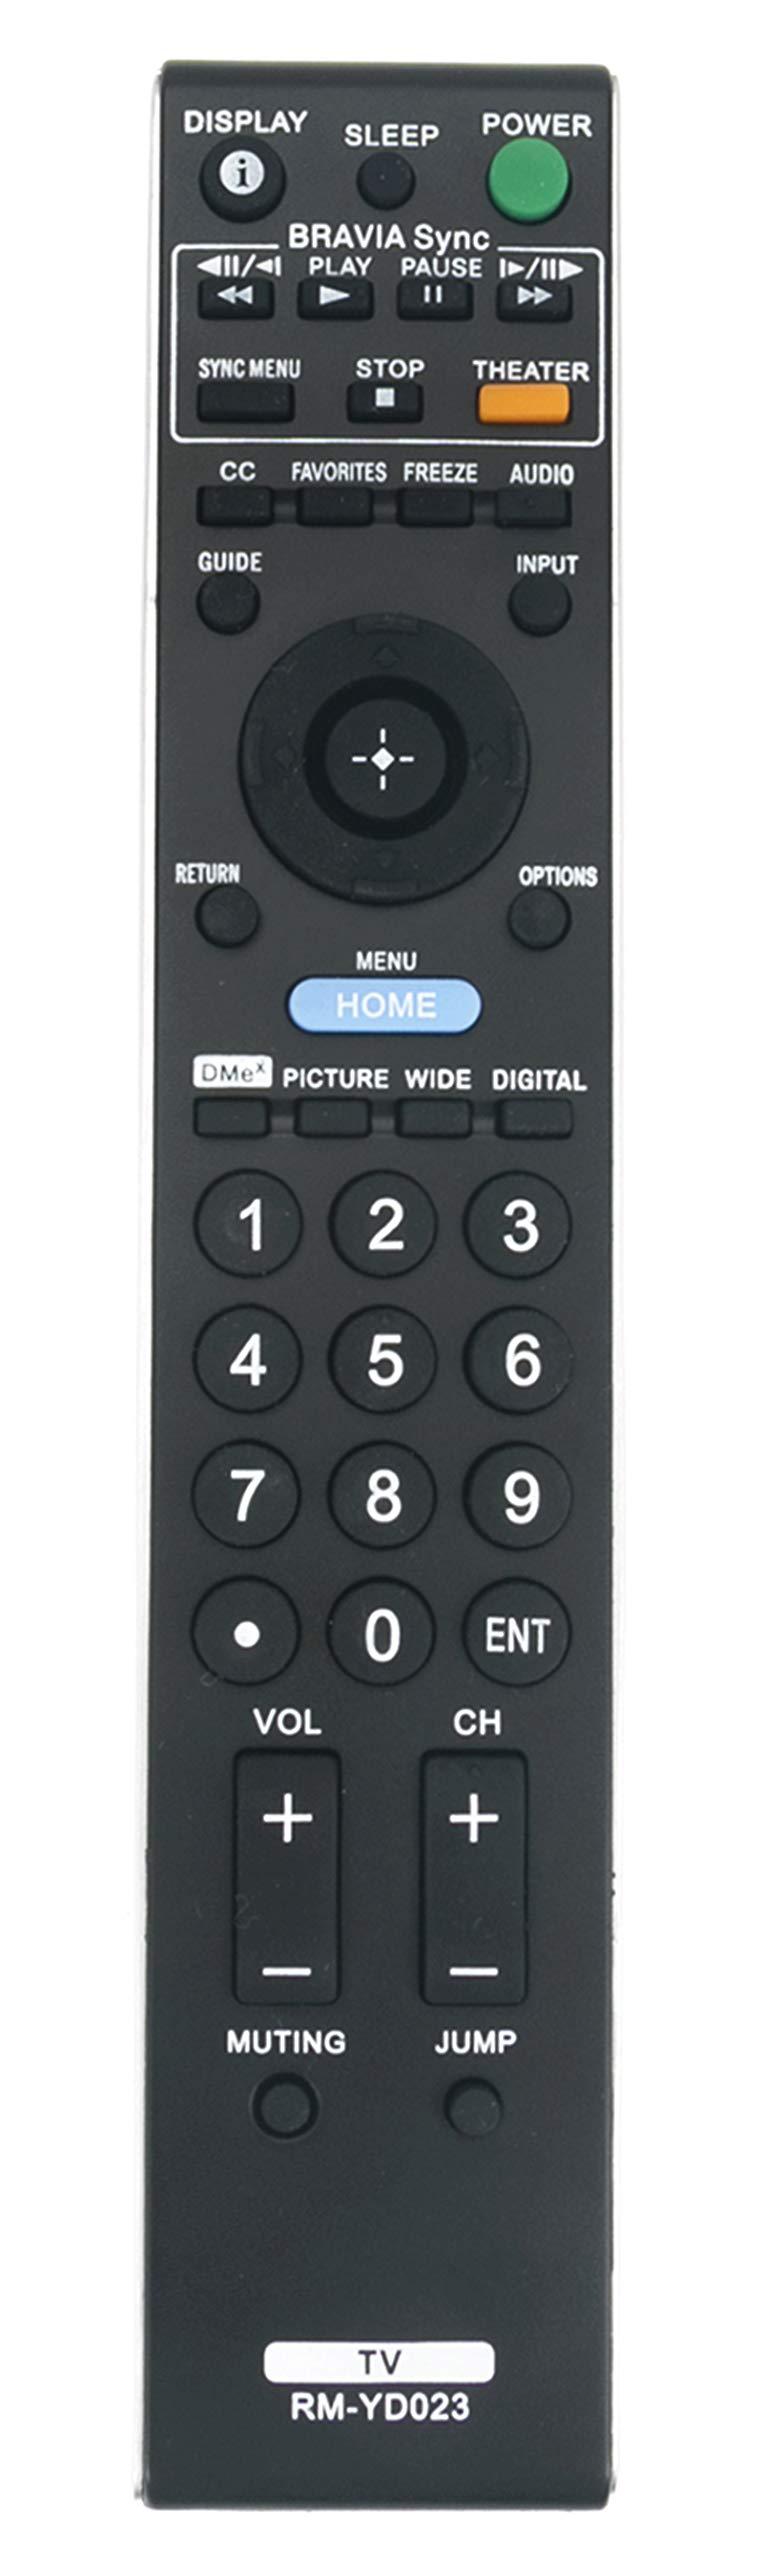 New RM-YD023 Replace Remote fit for Sony Bravia TV KDL-32VL140 KDL-32XBR6 KDL-37XBR6 KDL-40V4100 KDL-40V4150 KDL-40W4100 KDL-40WL140 KDL-42V4100 KDL-46V4100 KDL-46W4100 KDL-46W4150 KDL-46WL140 - LeoForward Australia